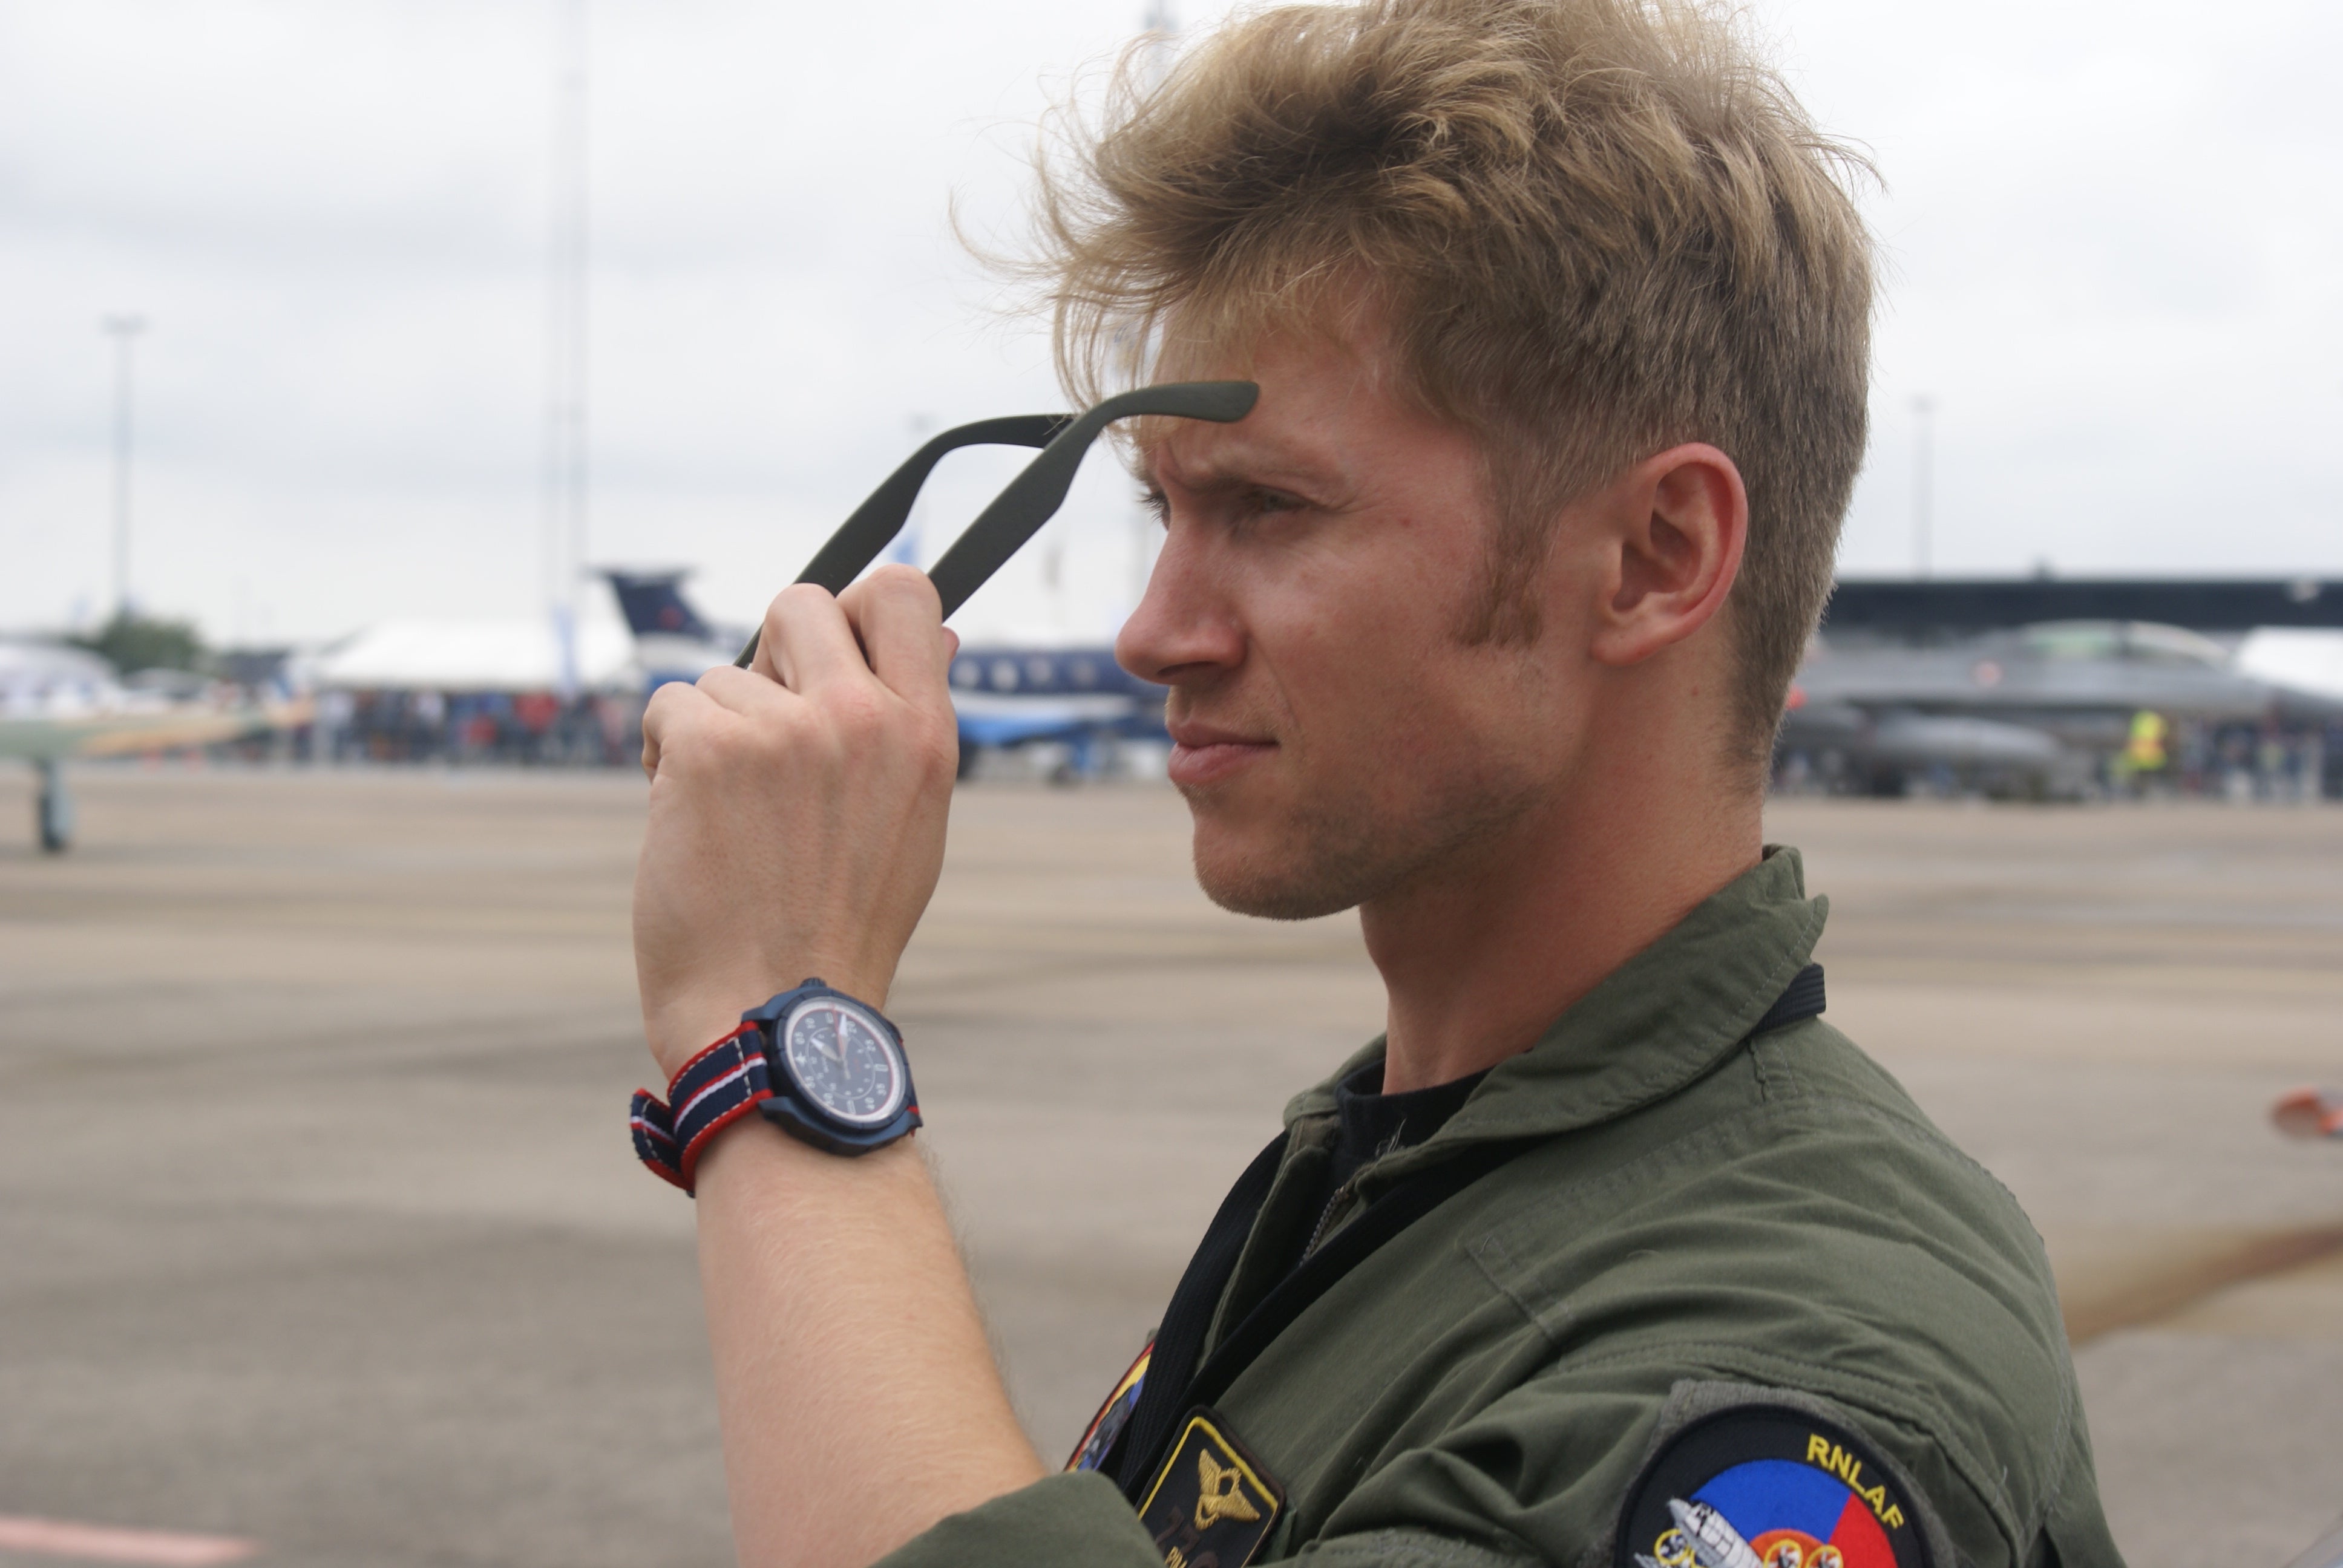 NEWS - Video release of the new F14 Tomcat inspired watches